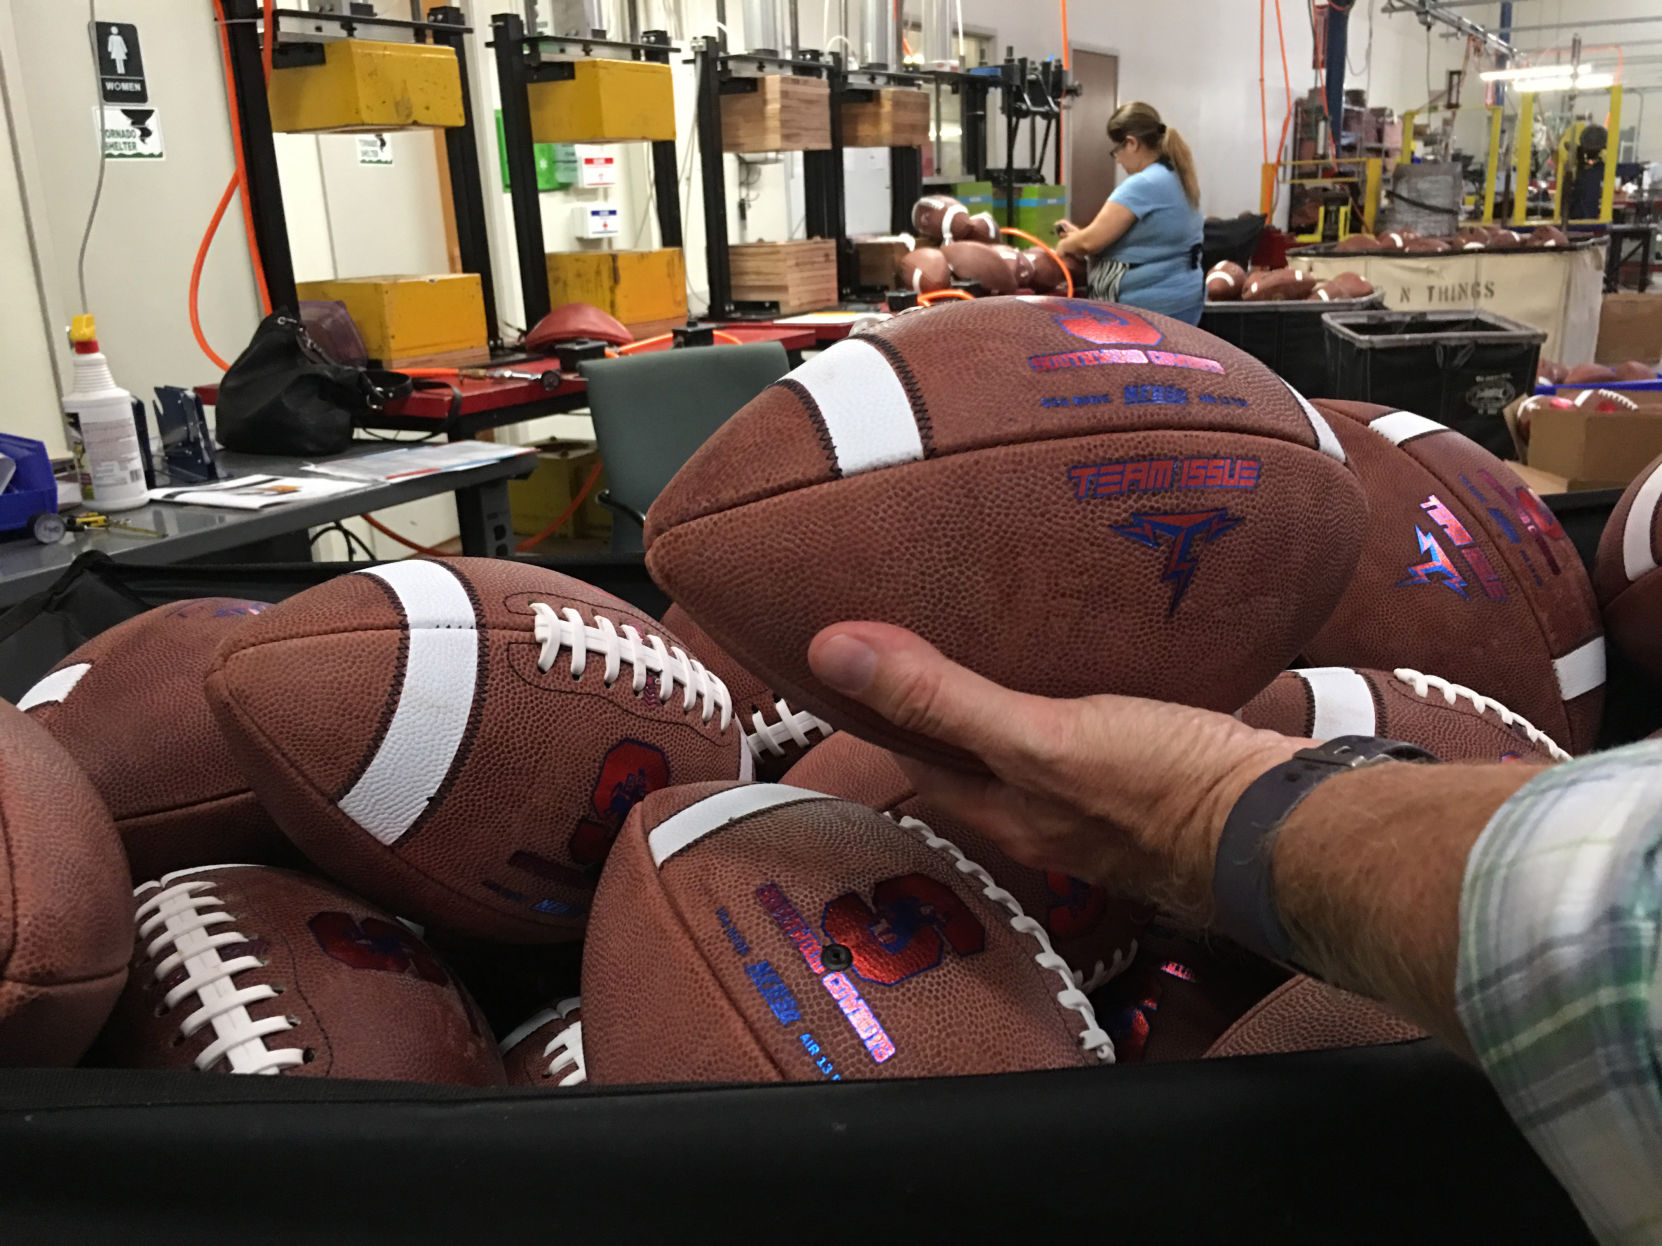 game balls have Lone Star roots 